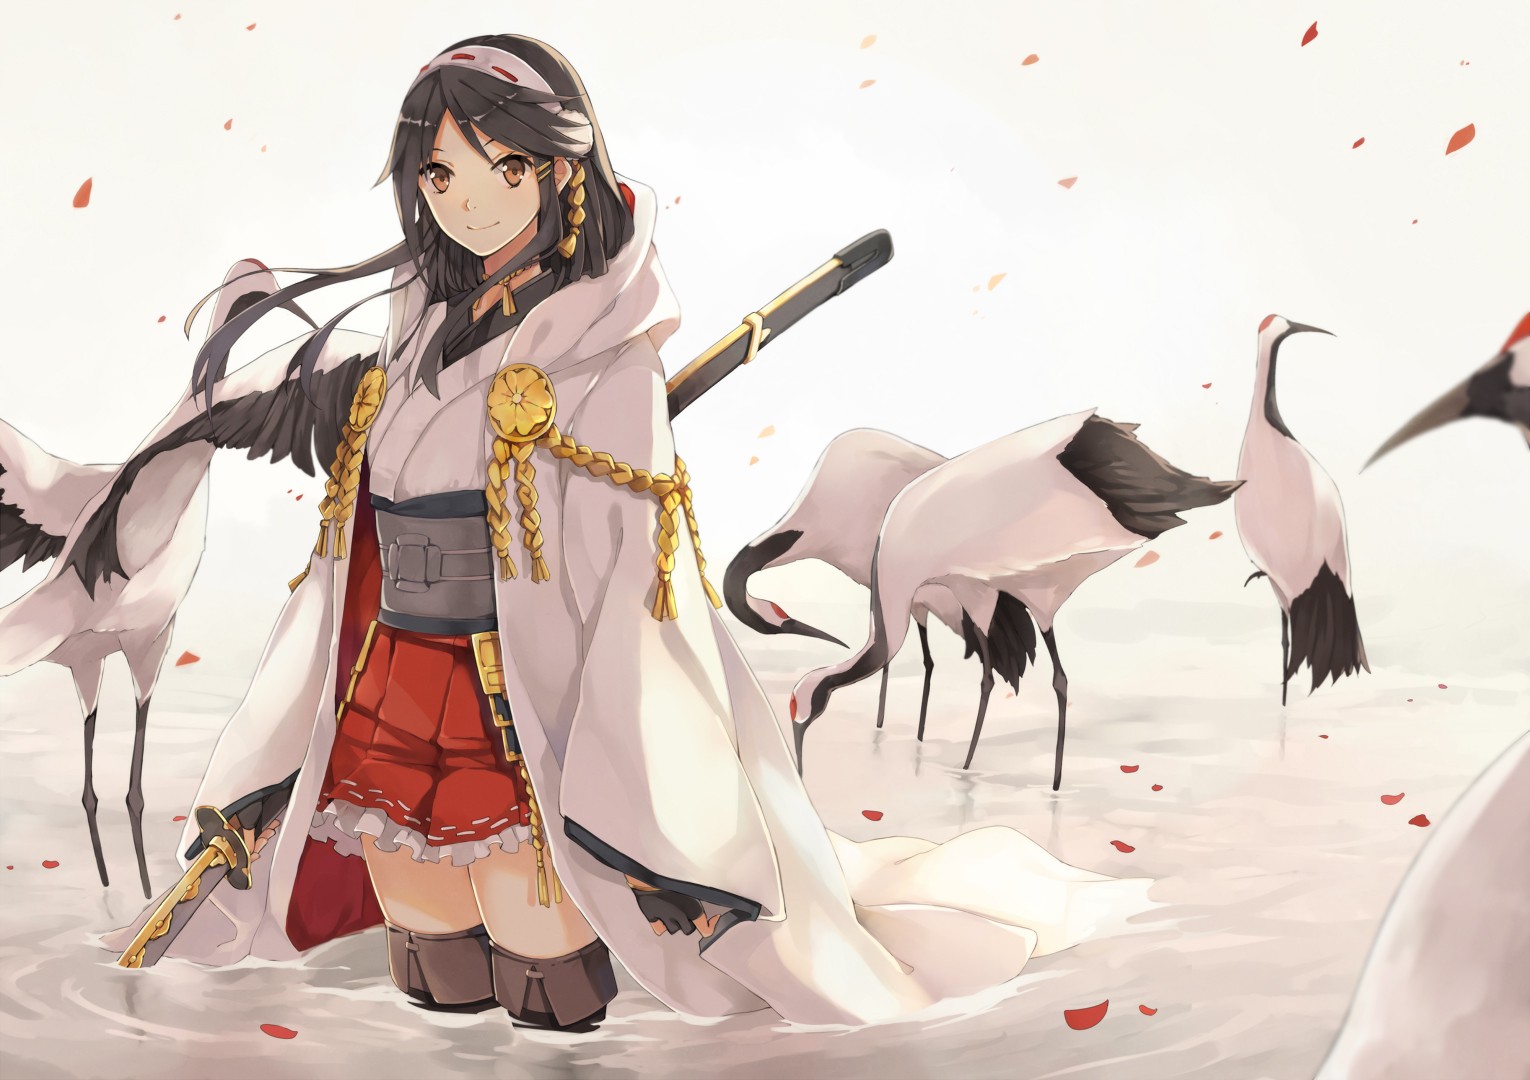 Anime 1530x1080 birds animals brown eyes anime girls anime Kantai Collection fantasy art fantasy girl dark hair smiling in water women with swords sword weapon looking at viewer simple background white background